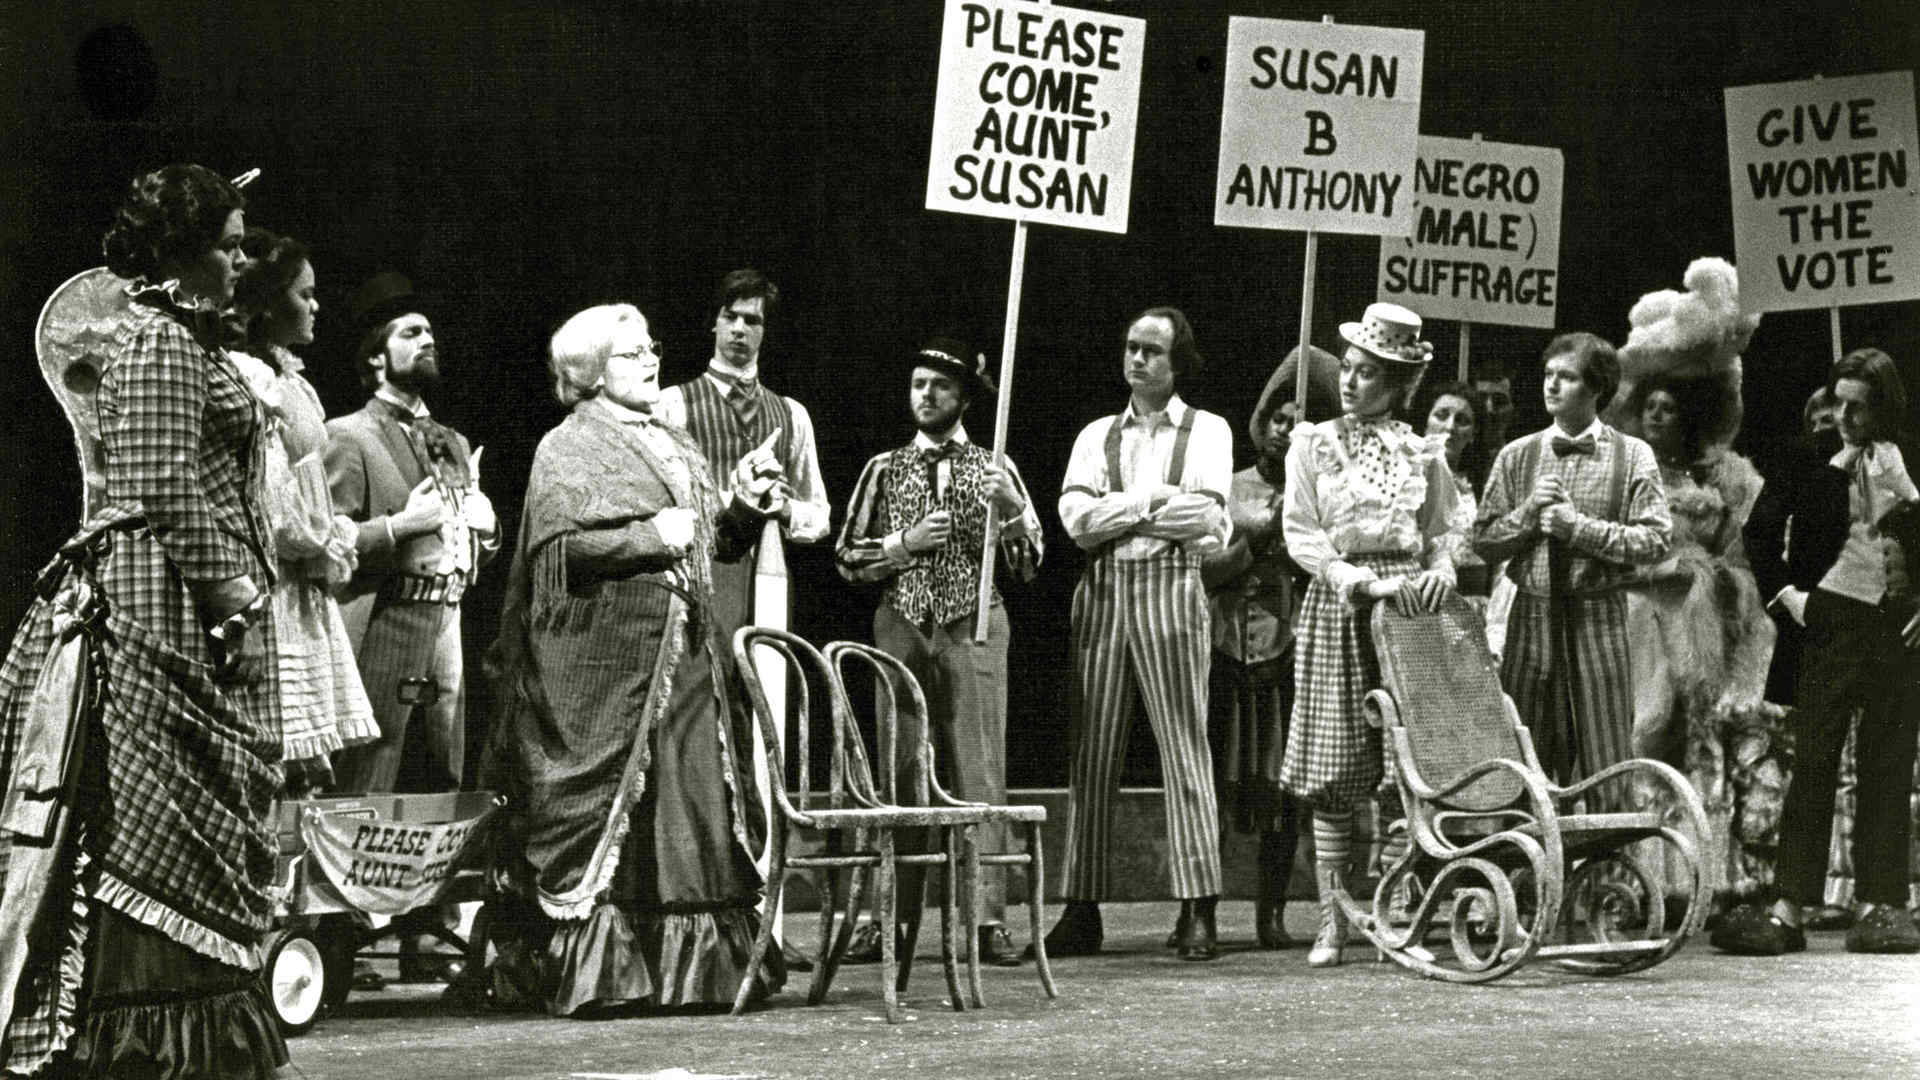 An archival (black and white) photo from Juilliard's workshop production of 'The Mother of Us All' in 1980